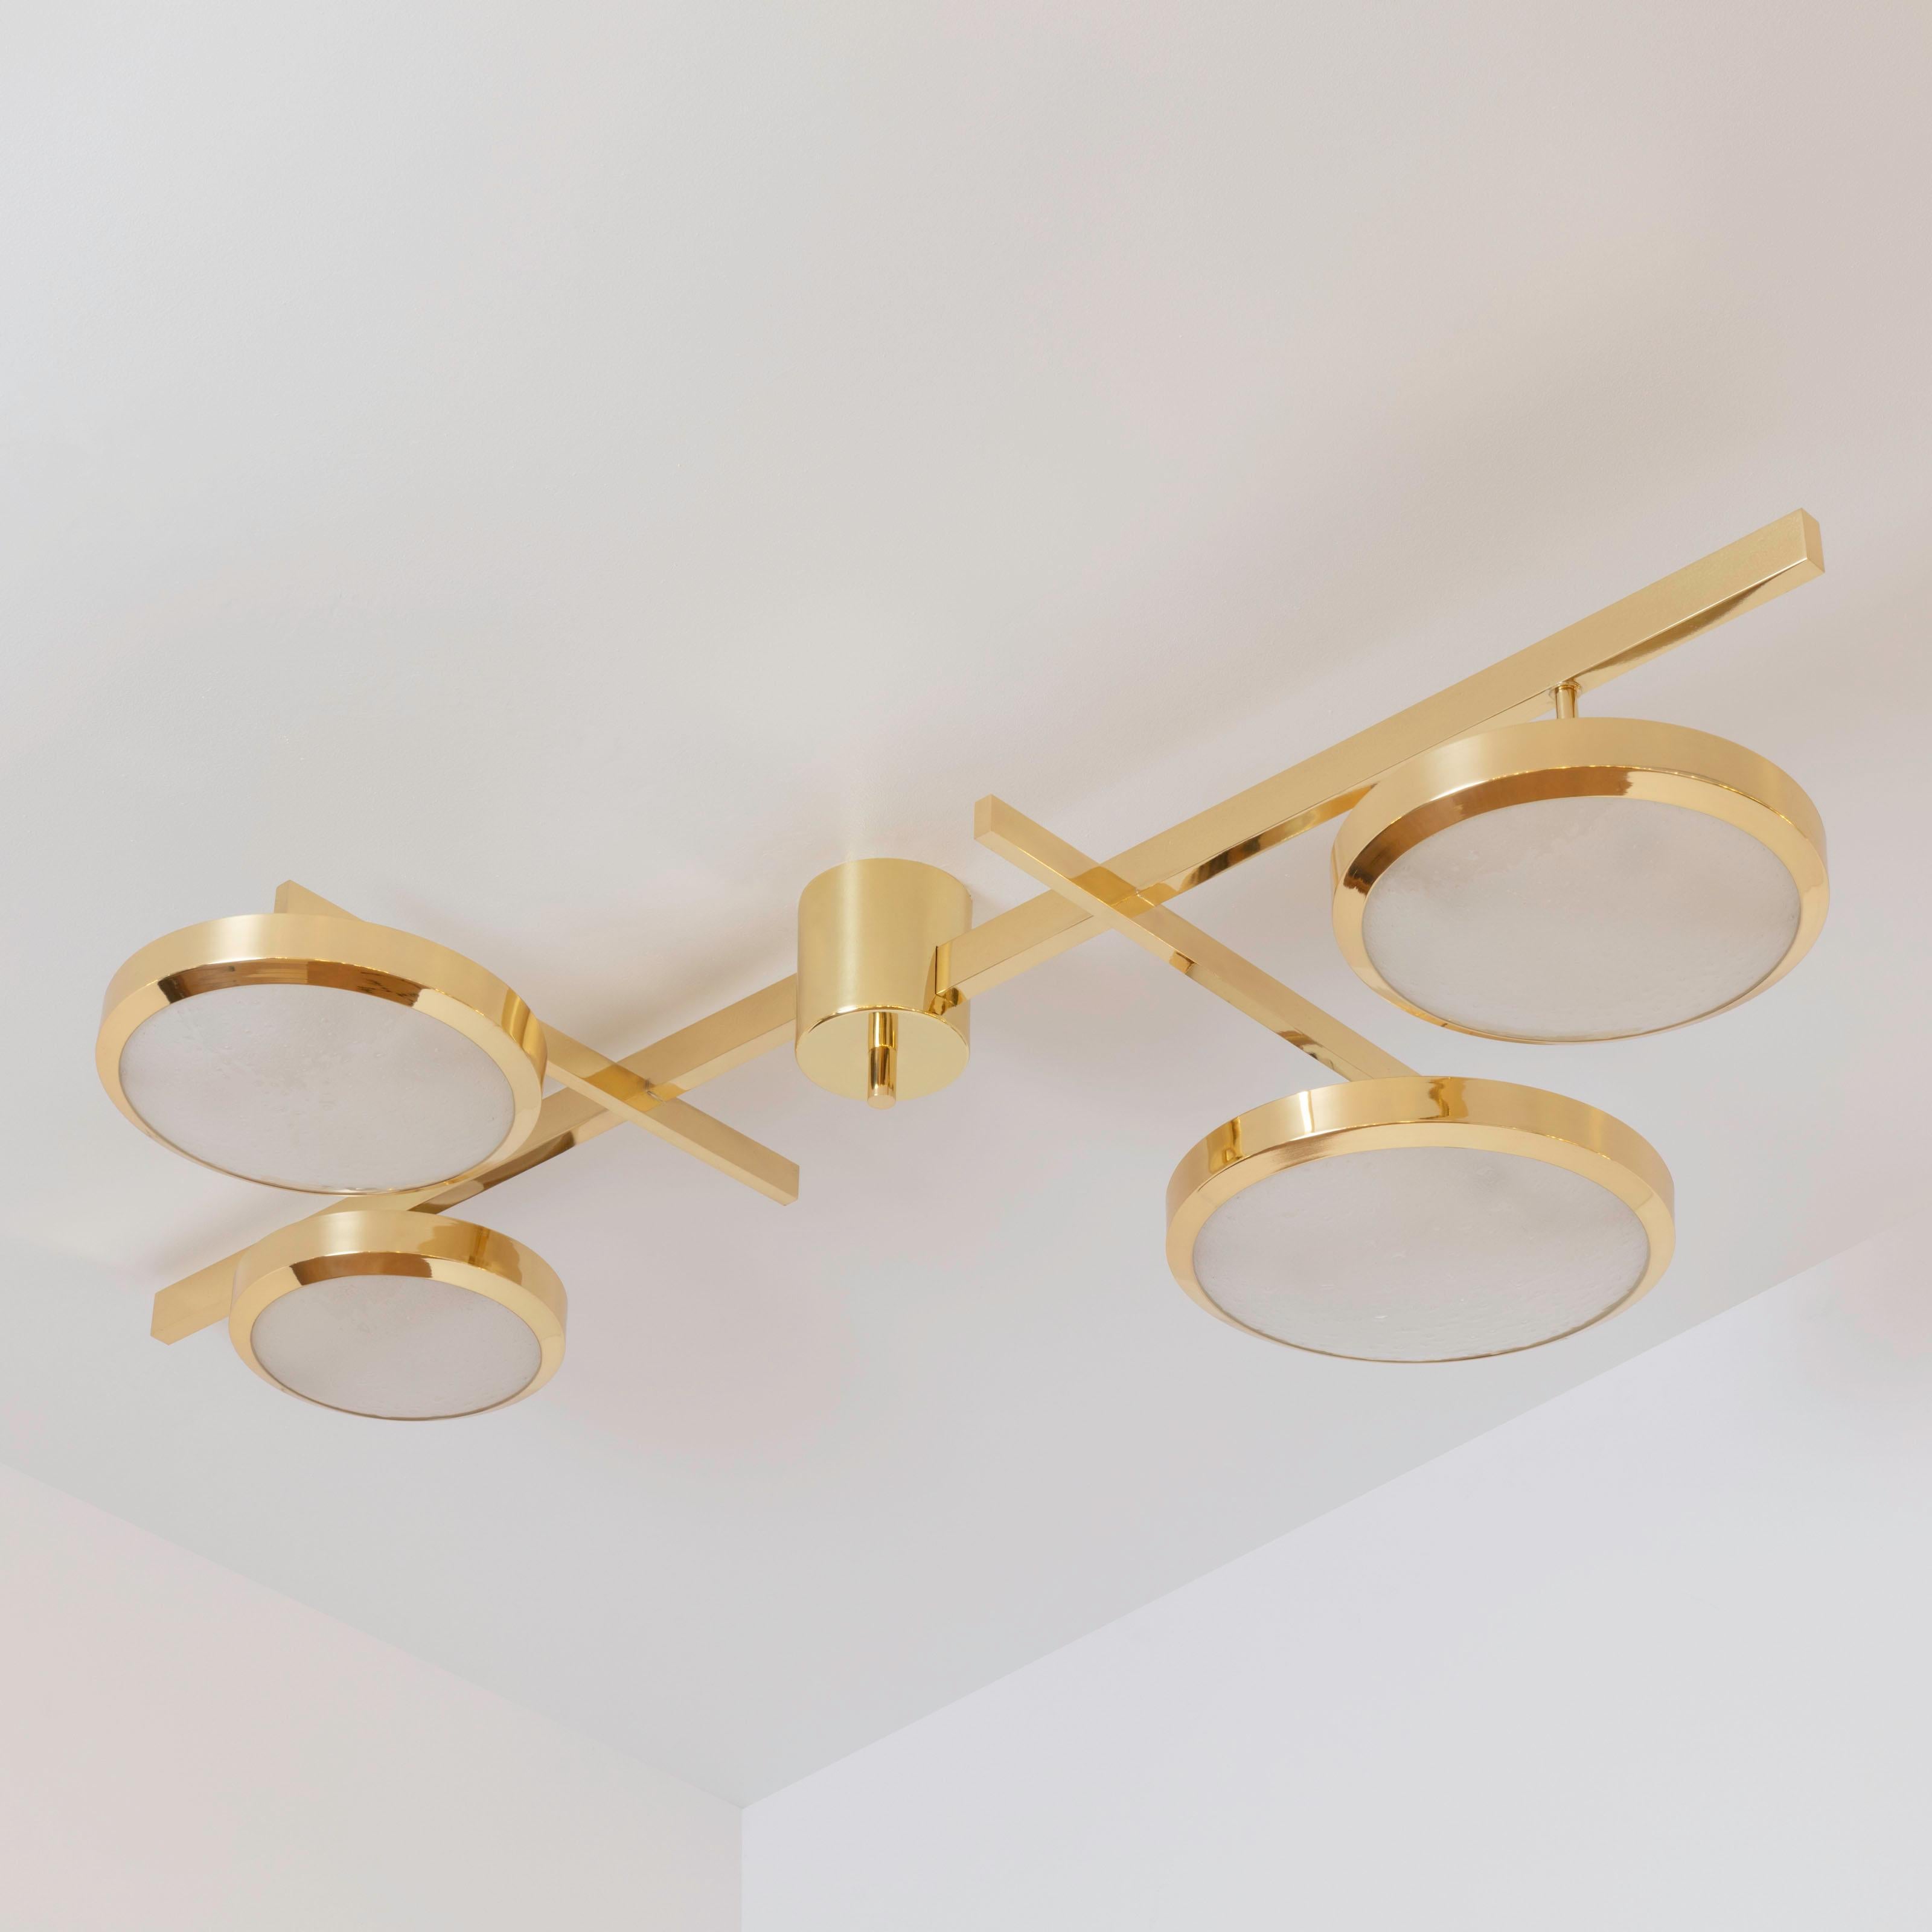 Tetrix Ceiling Light by Gaspare Asaro-Satin Brass Finish For Sale 2